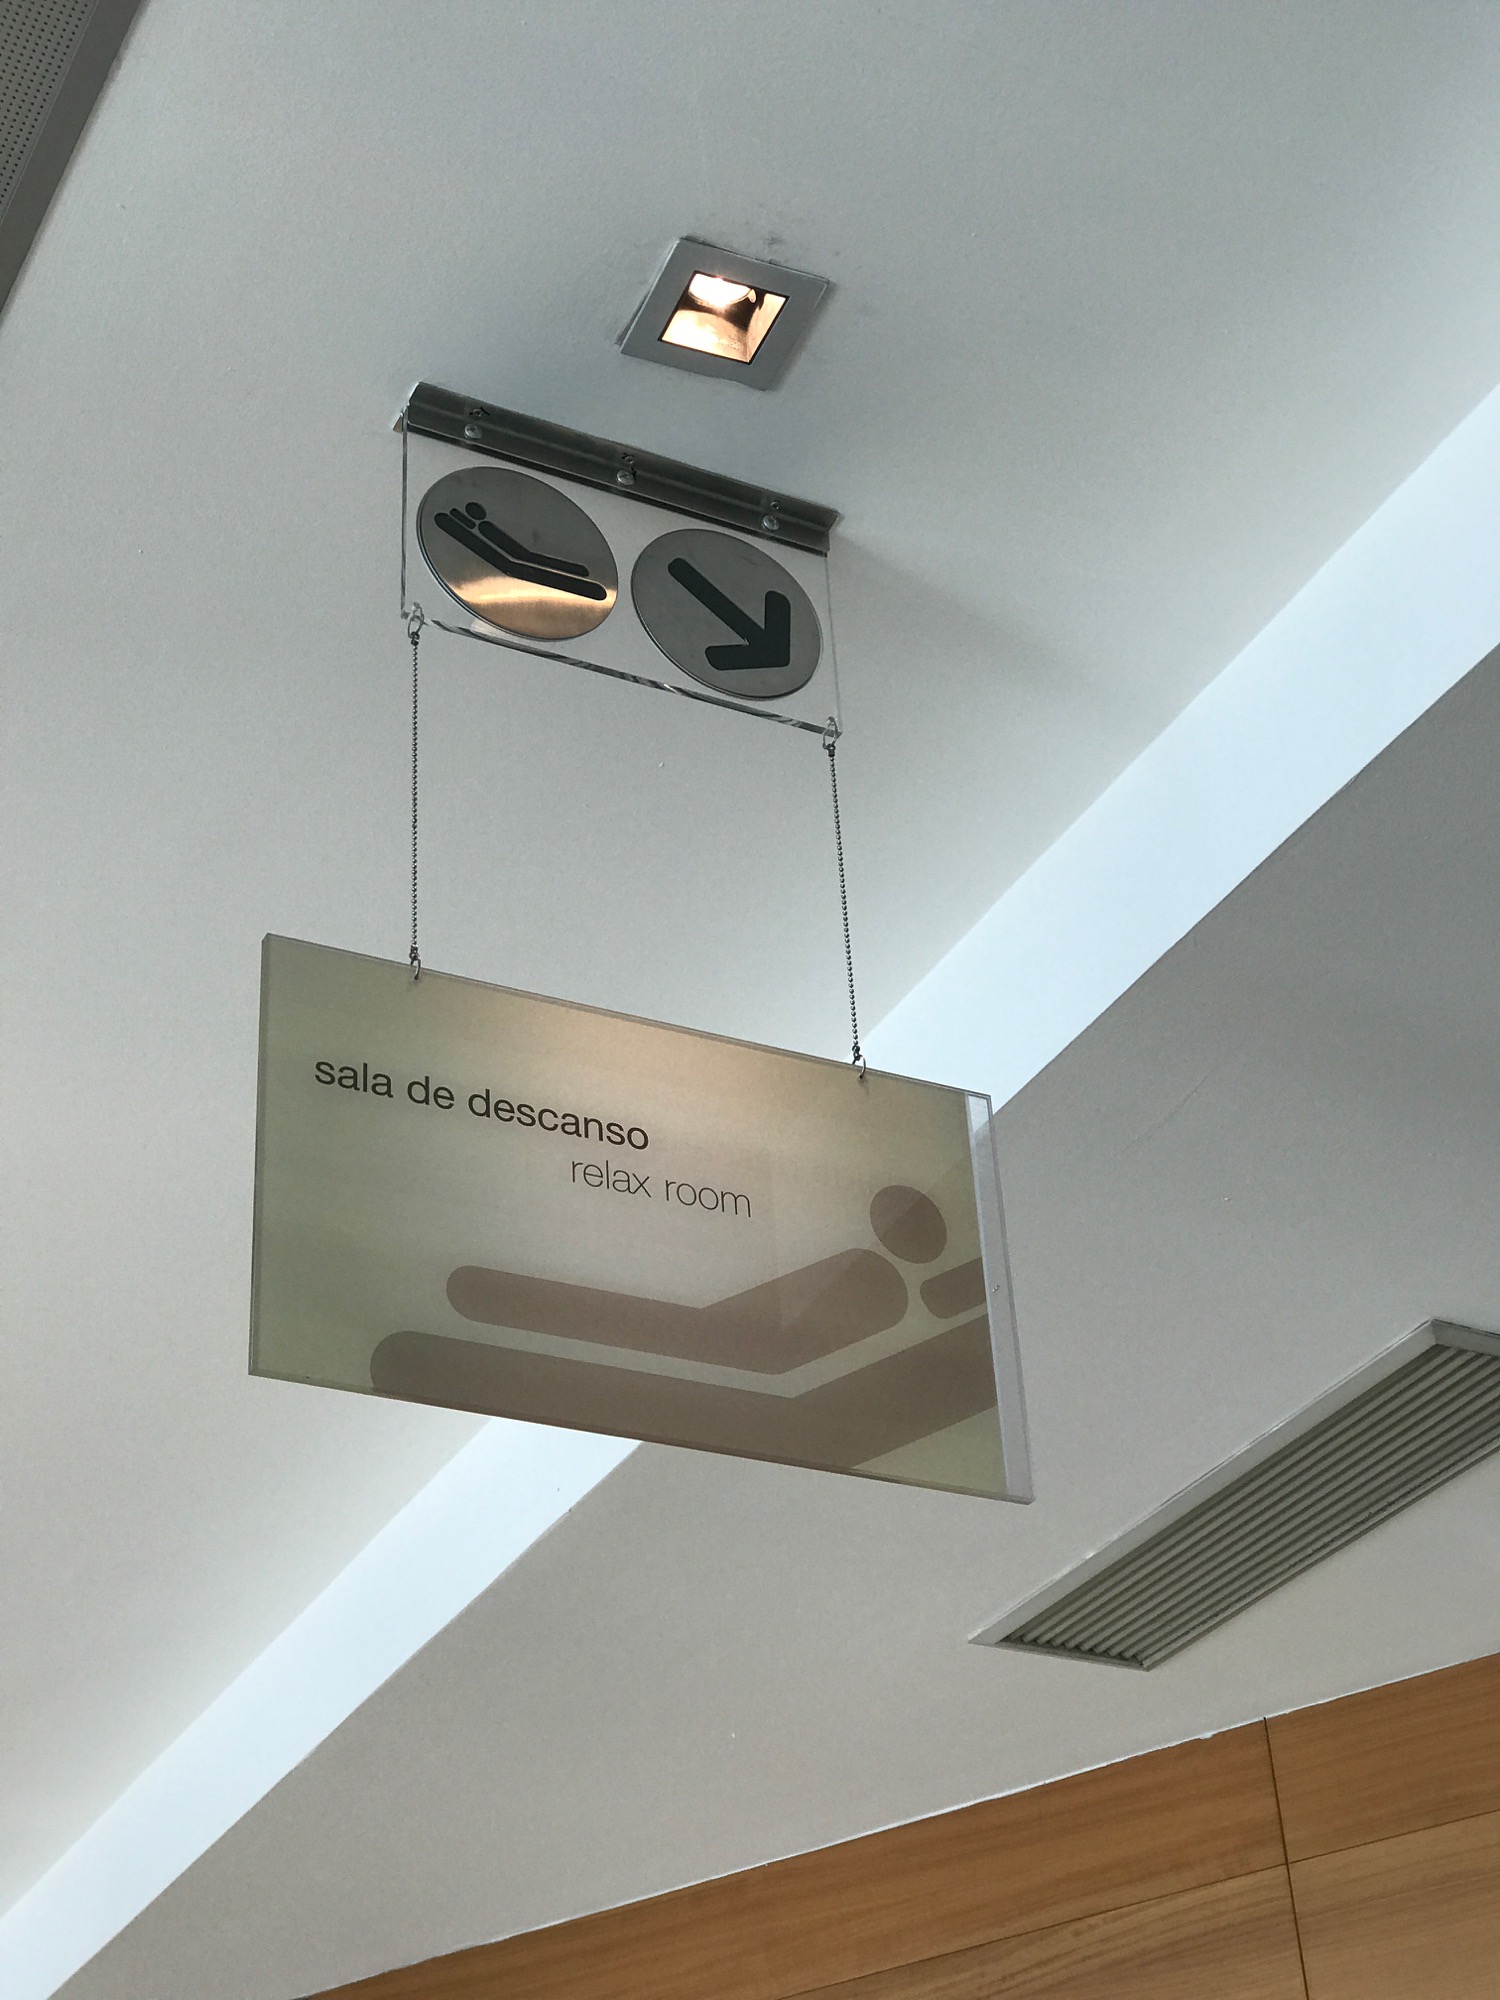 a sign from the ceiling